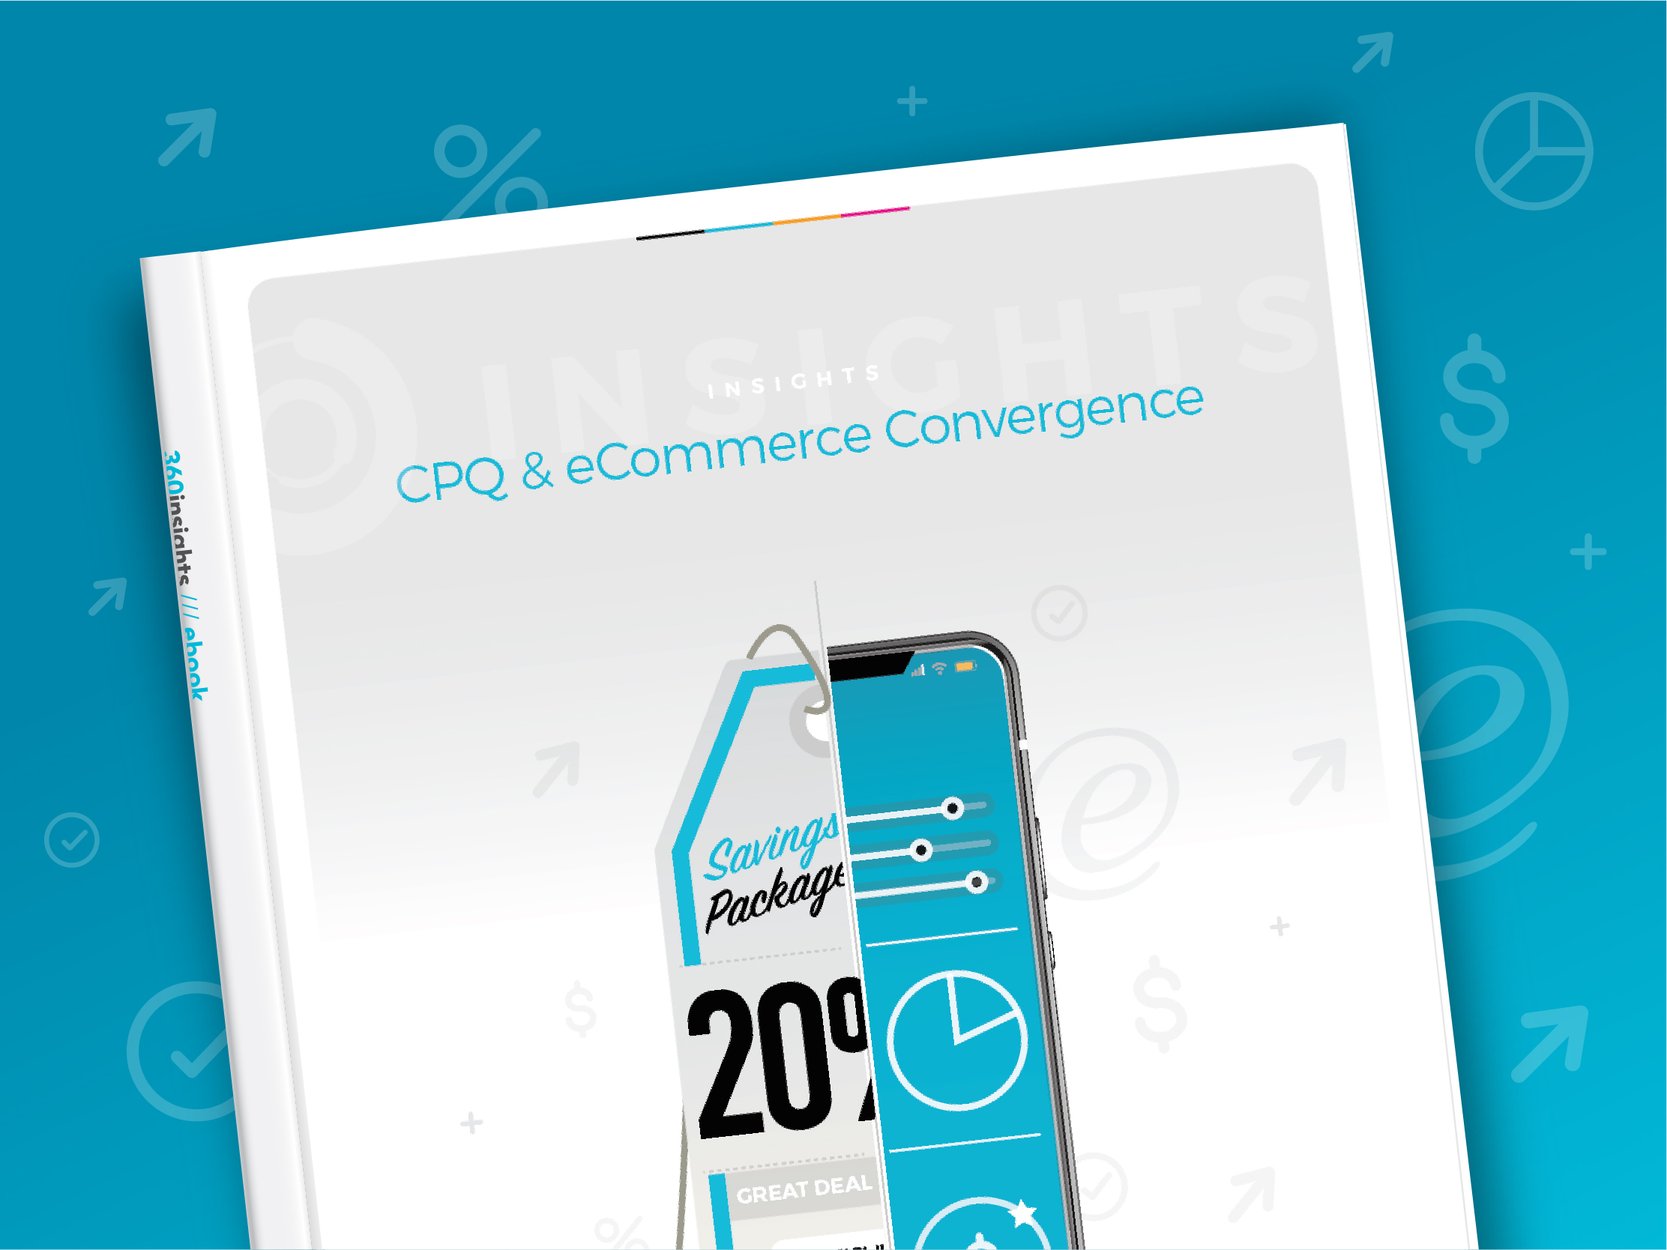 Insights Paper about the convergence of CPQ & eCommerce